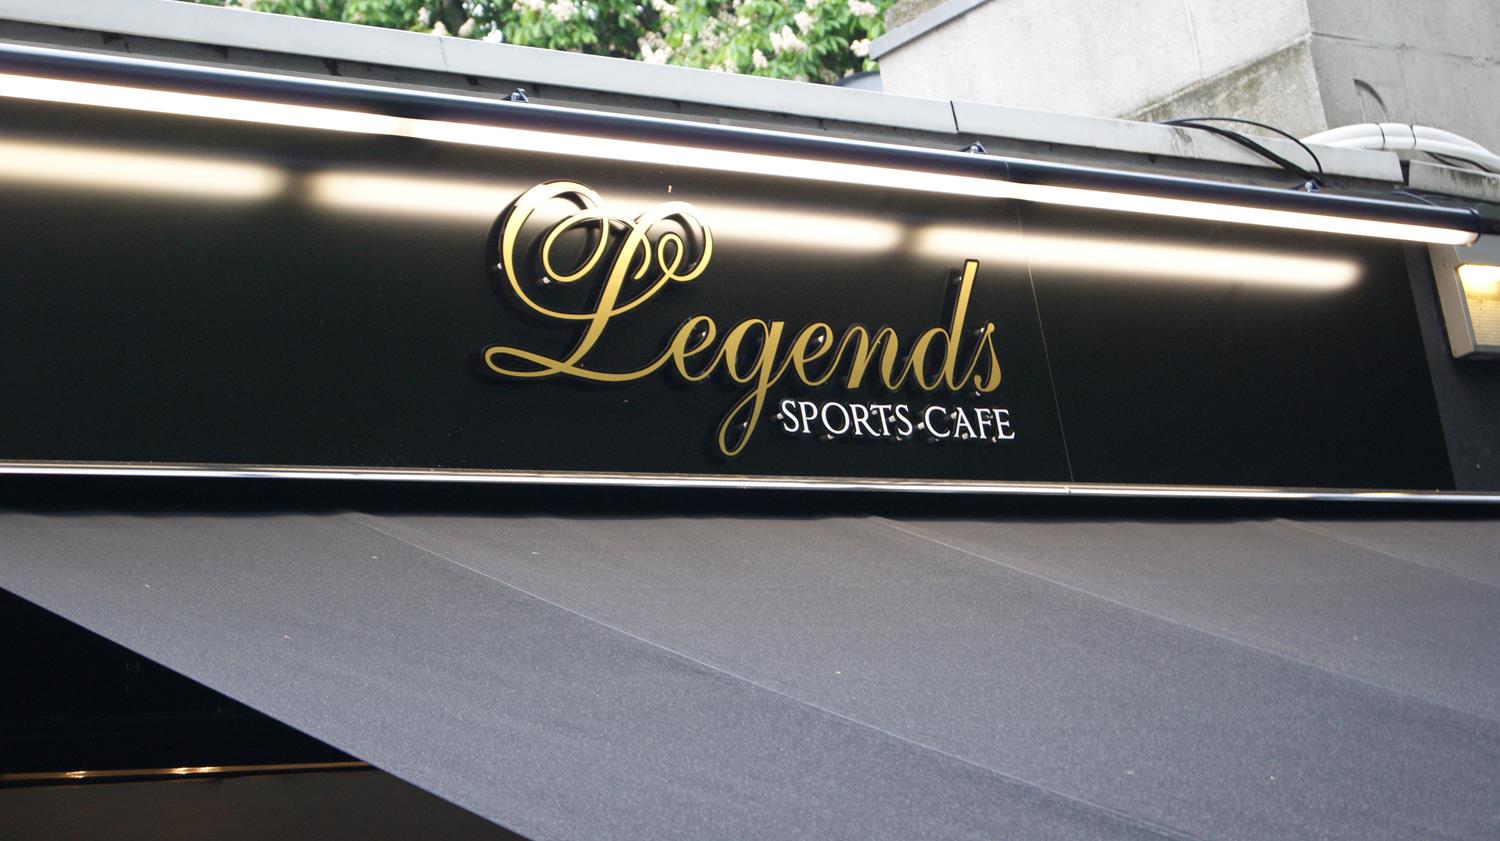 Legends Lounge Sports Cafe by Corporate Photographer MAKSAM Photography